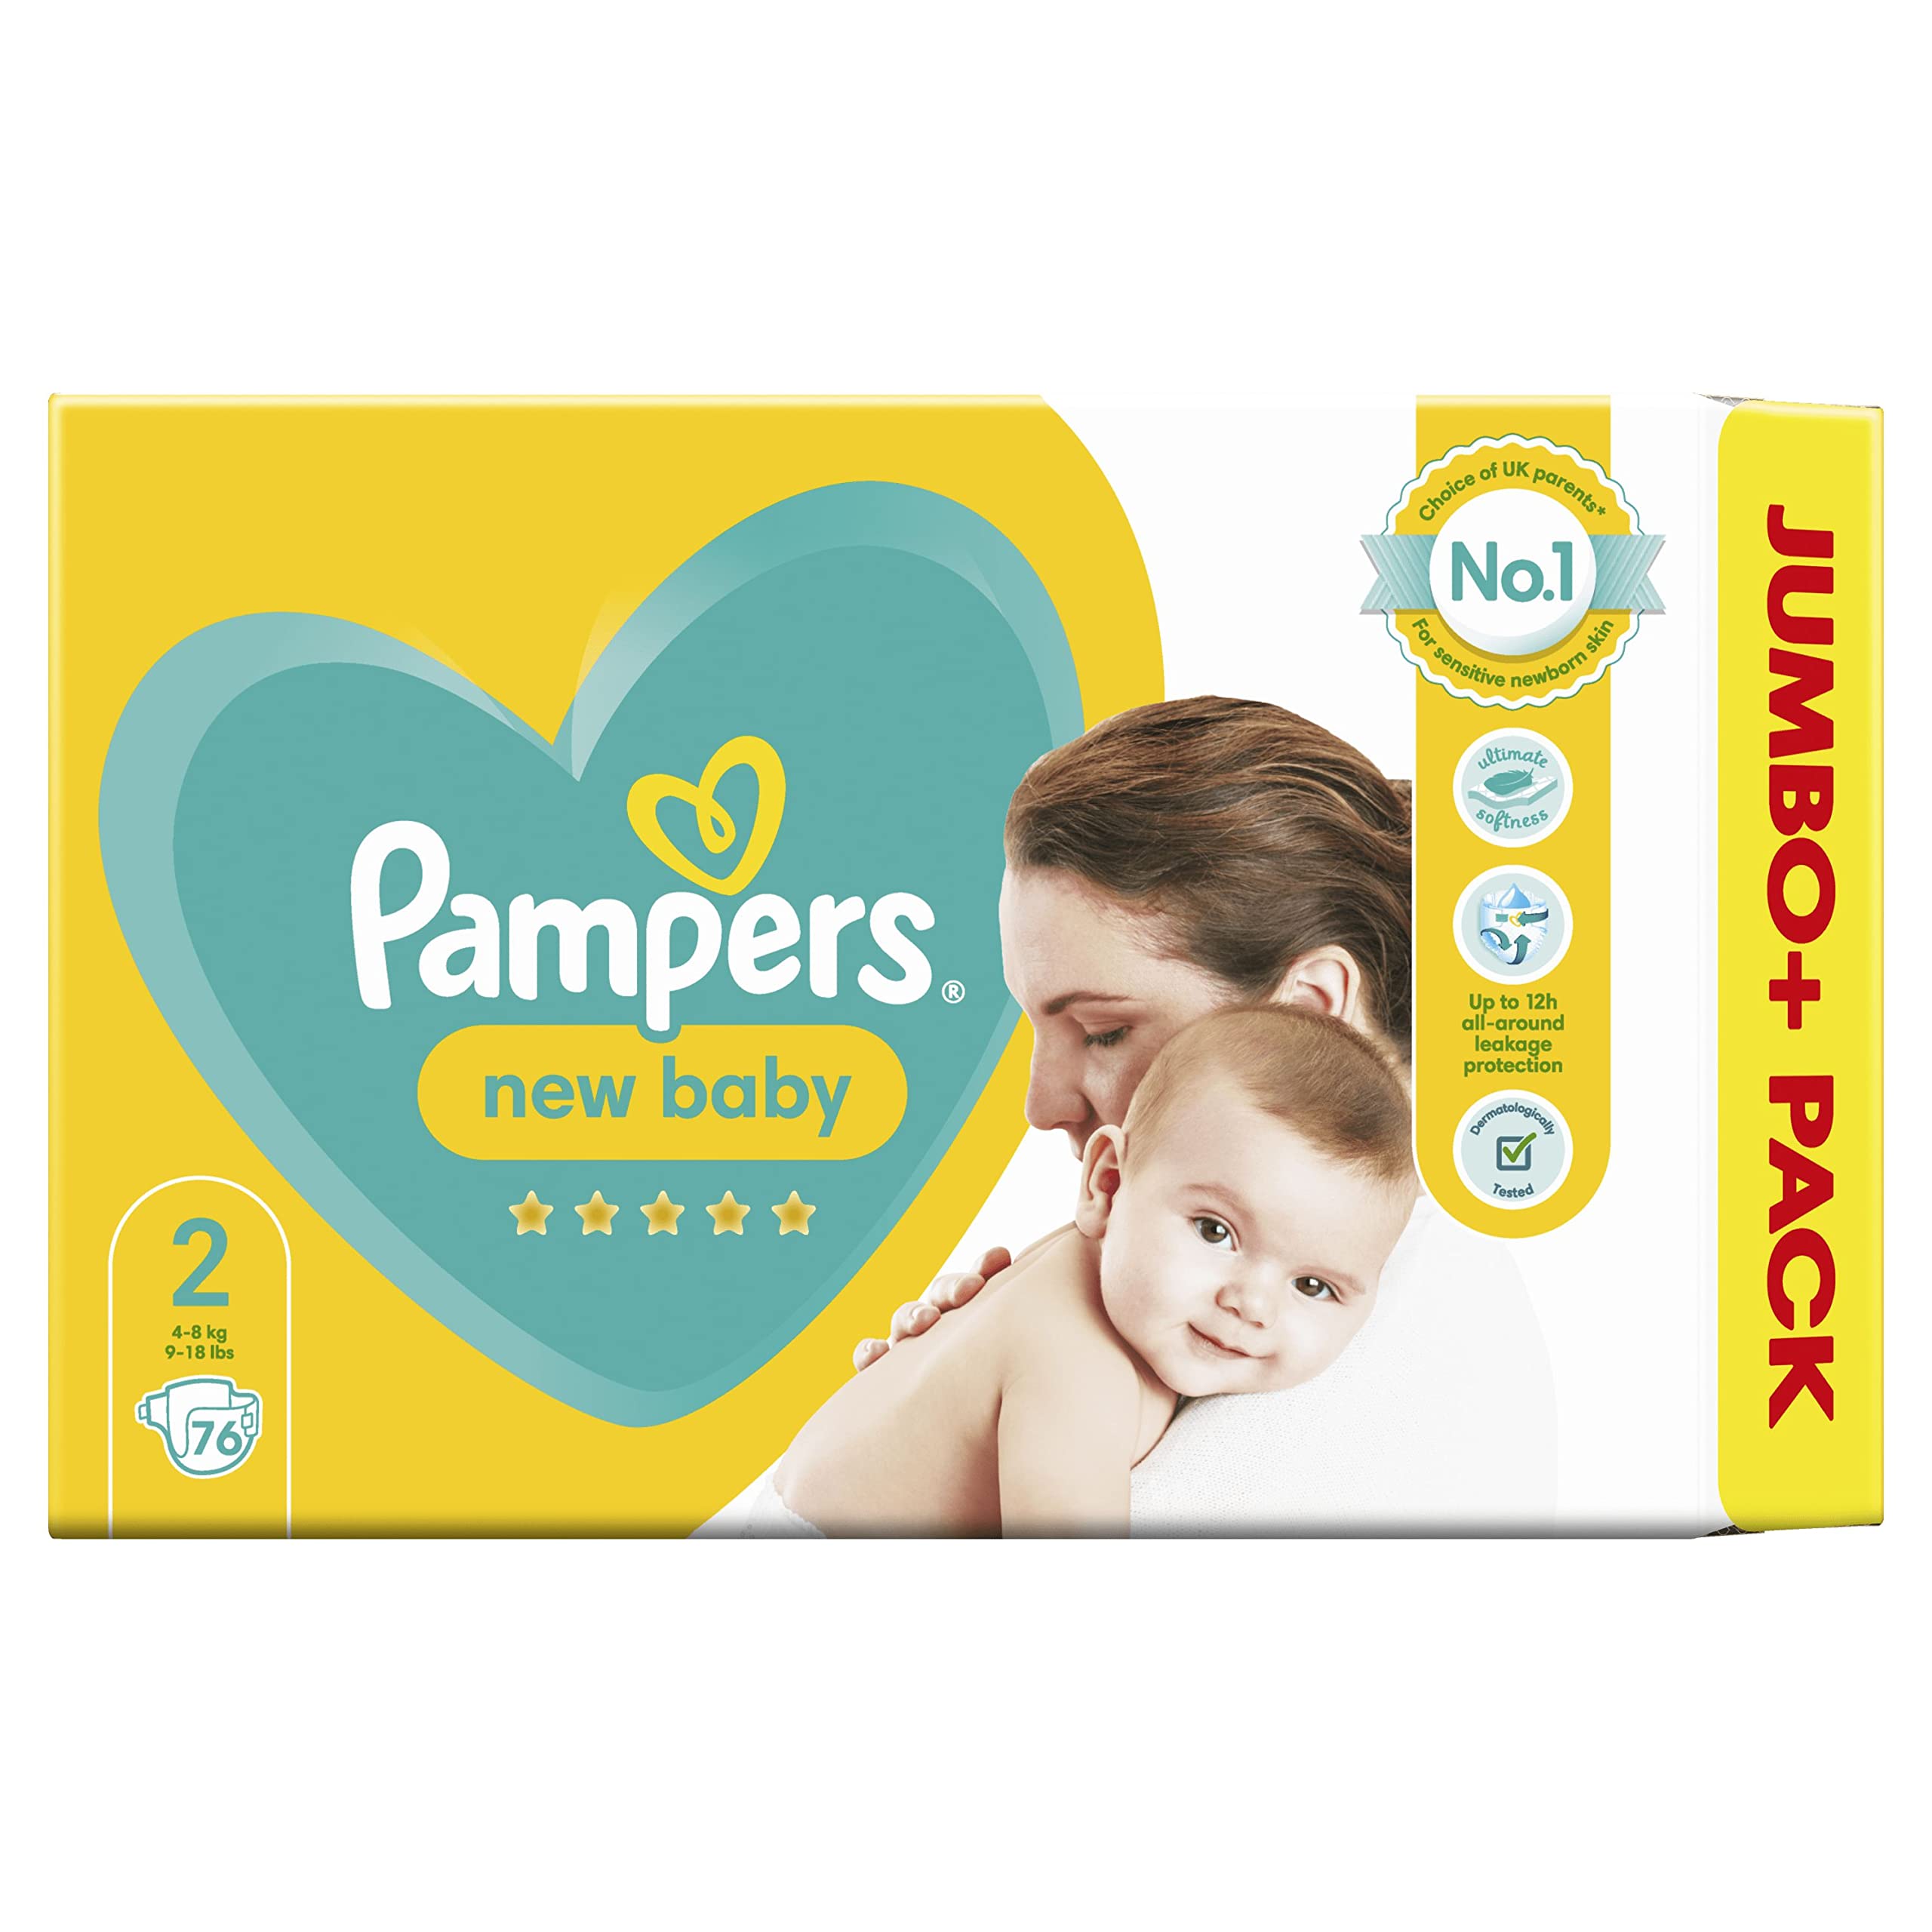 pampers nappies size 2